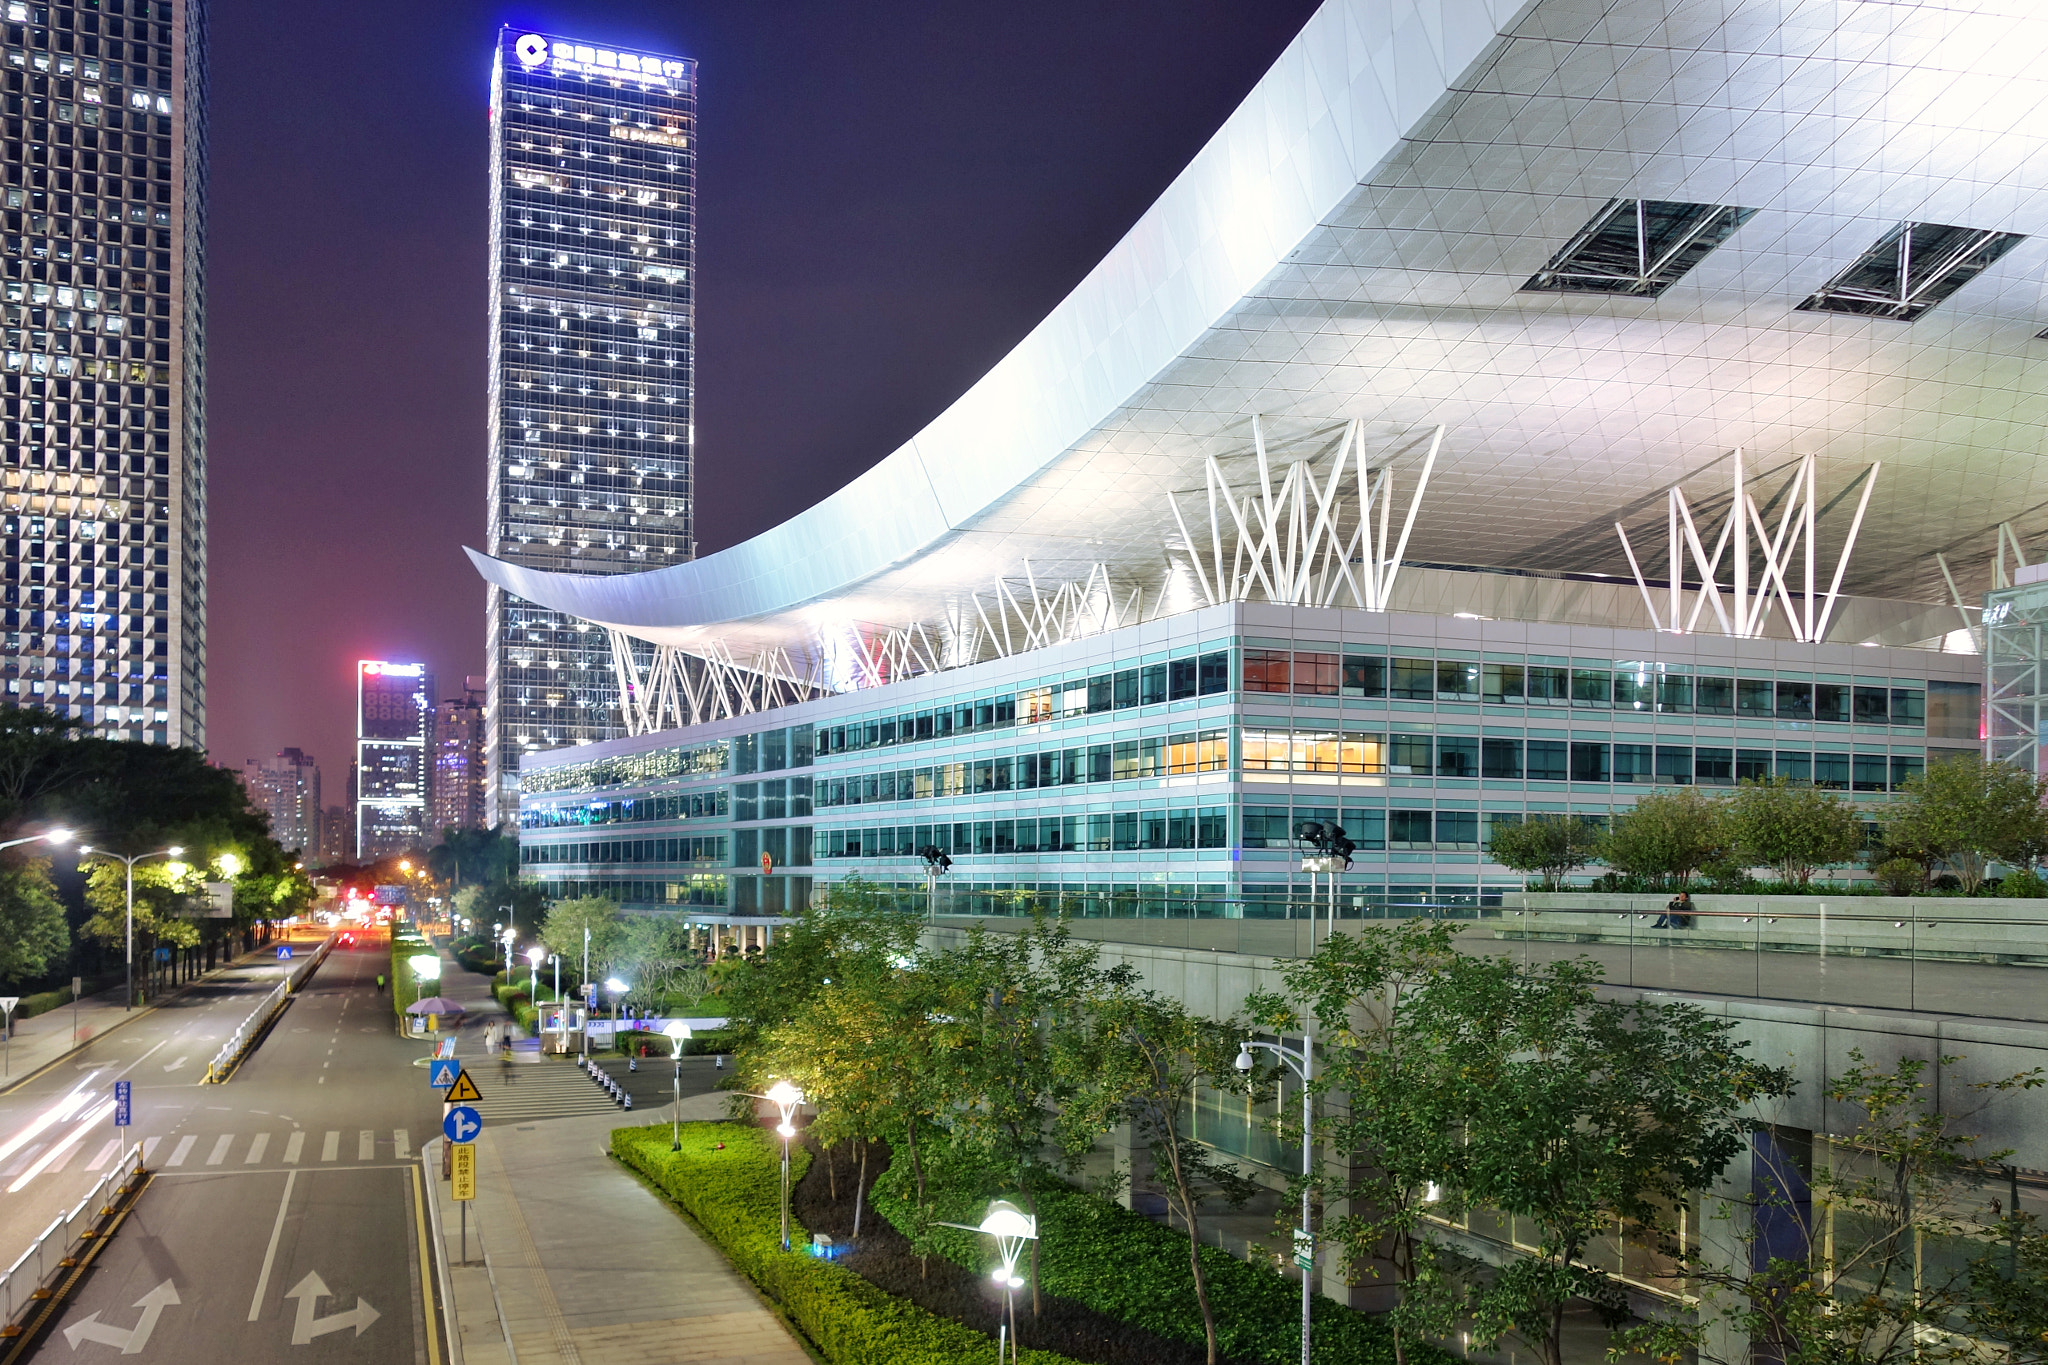 Sony Cyber-shot DSC-RX100 + Sony 28-100mm F1.8-4.9 sample photo. A night view of the shenzhen civic centre photography